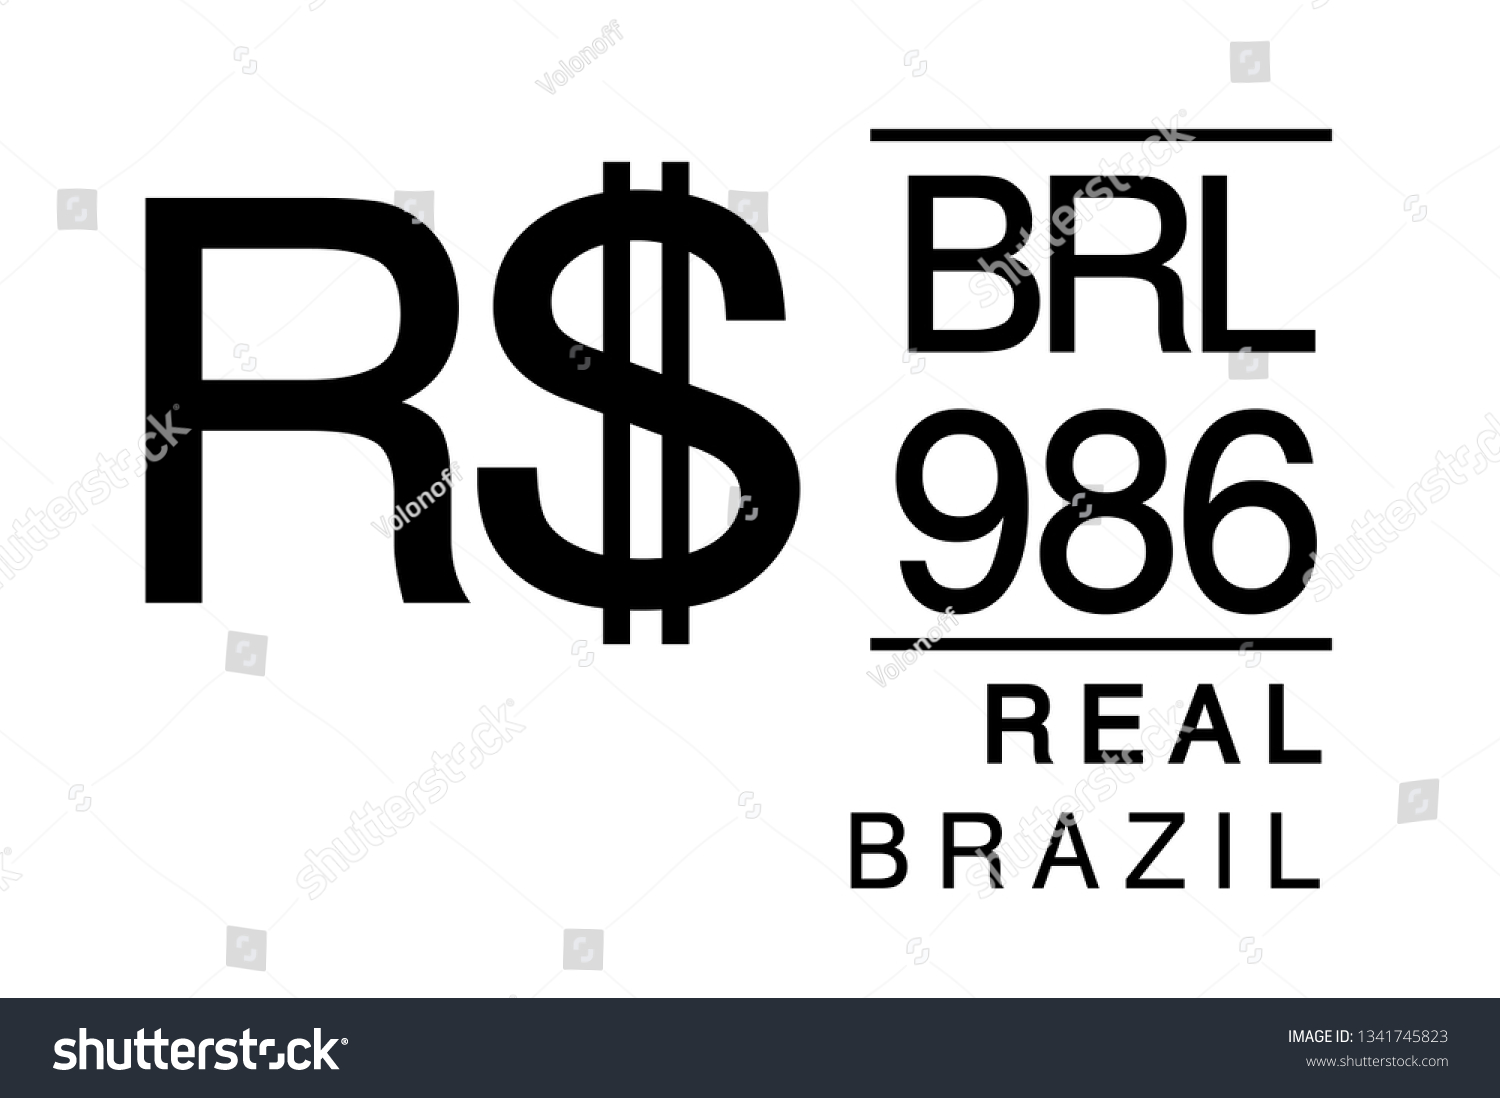 SVG of RS, BRL, 986, Real, Brazil Banking Currency icon typography logo banner set isolated on background. Abstract concept graphic element. Collection of currency symbols ISO 4217 signs used in country svg